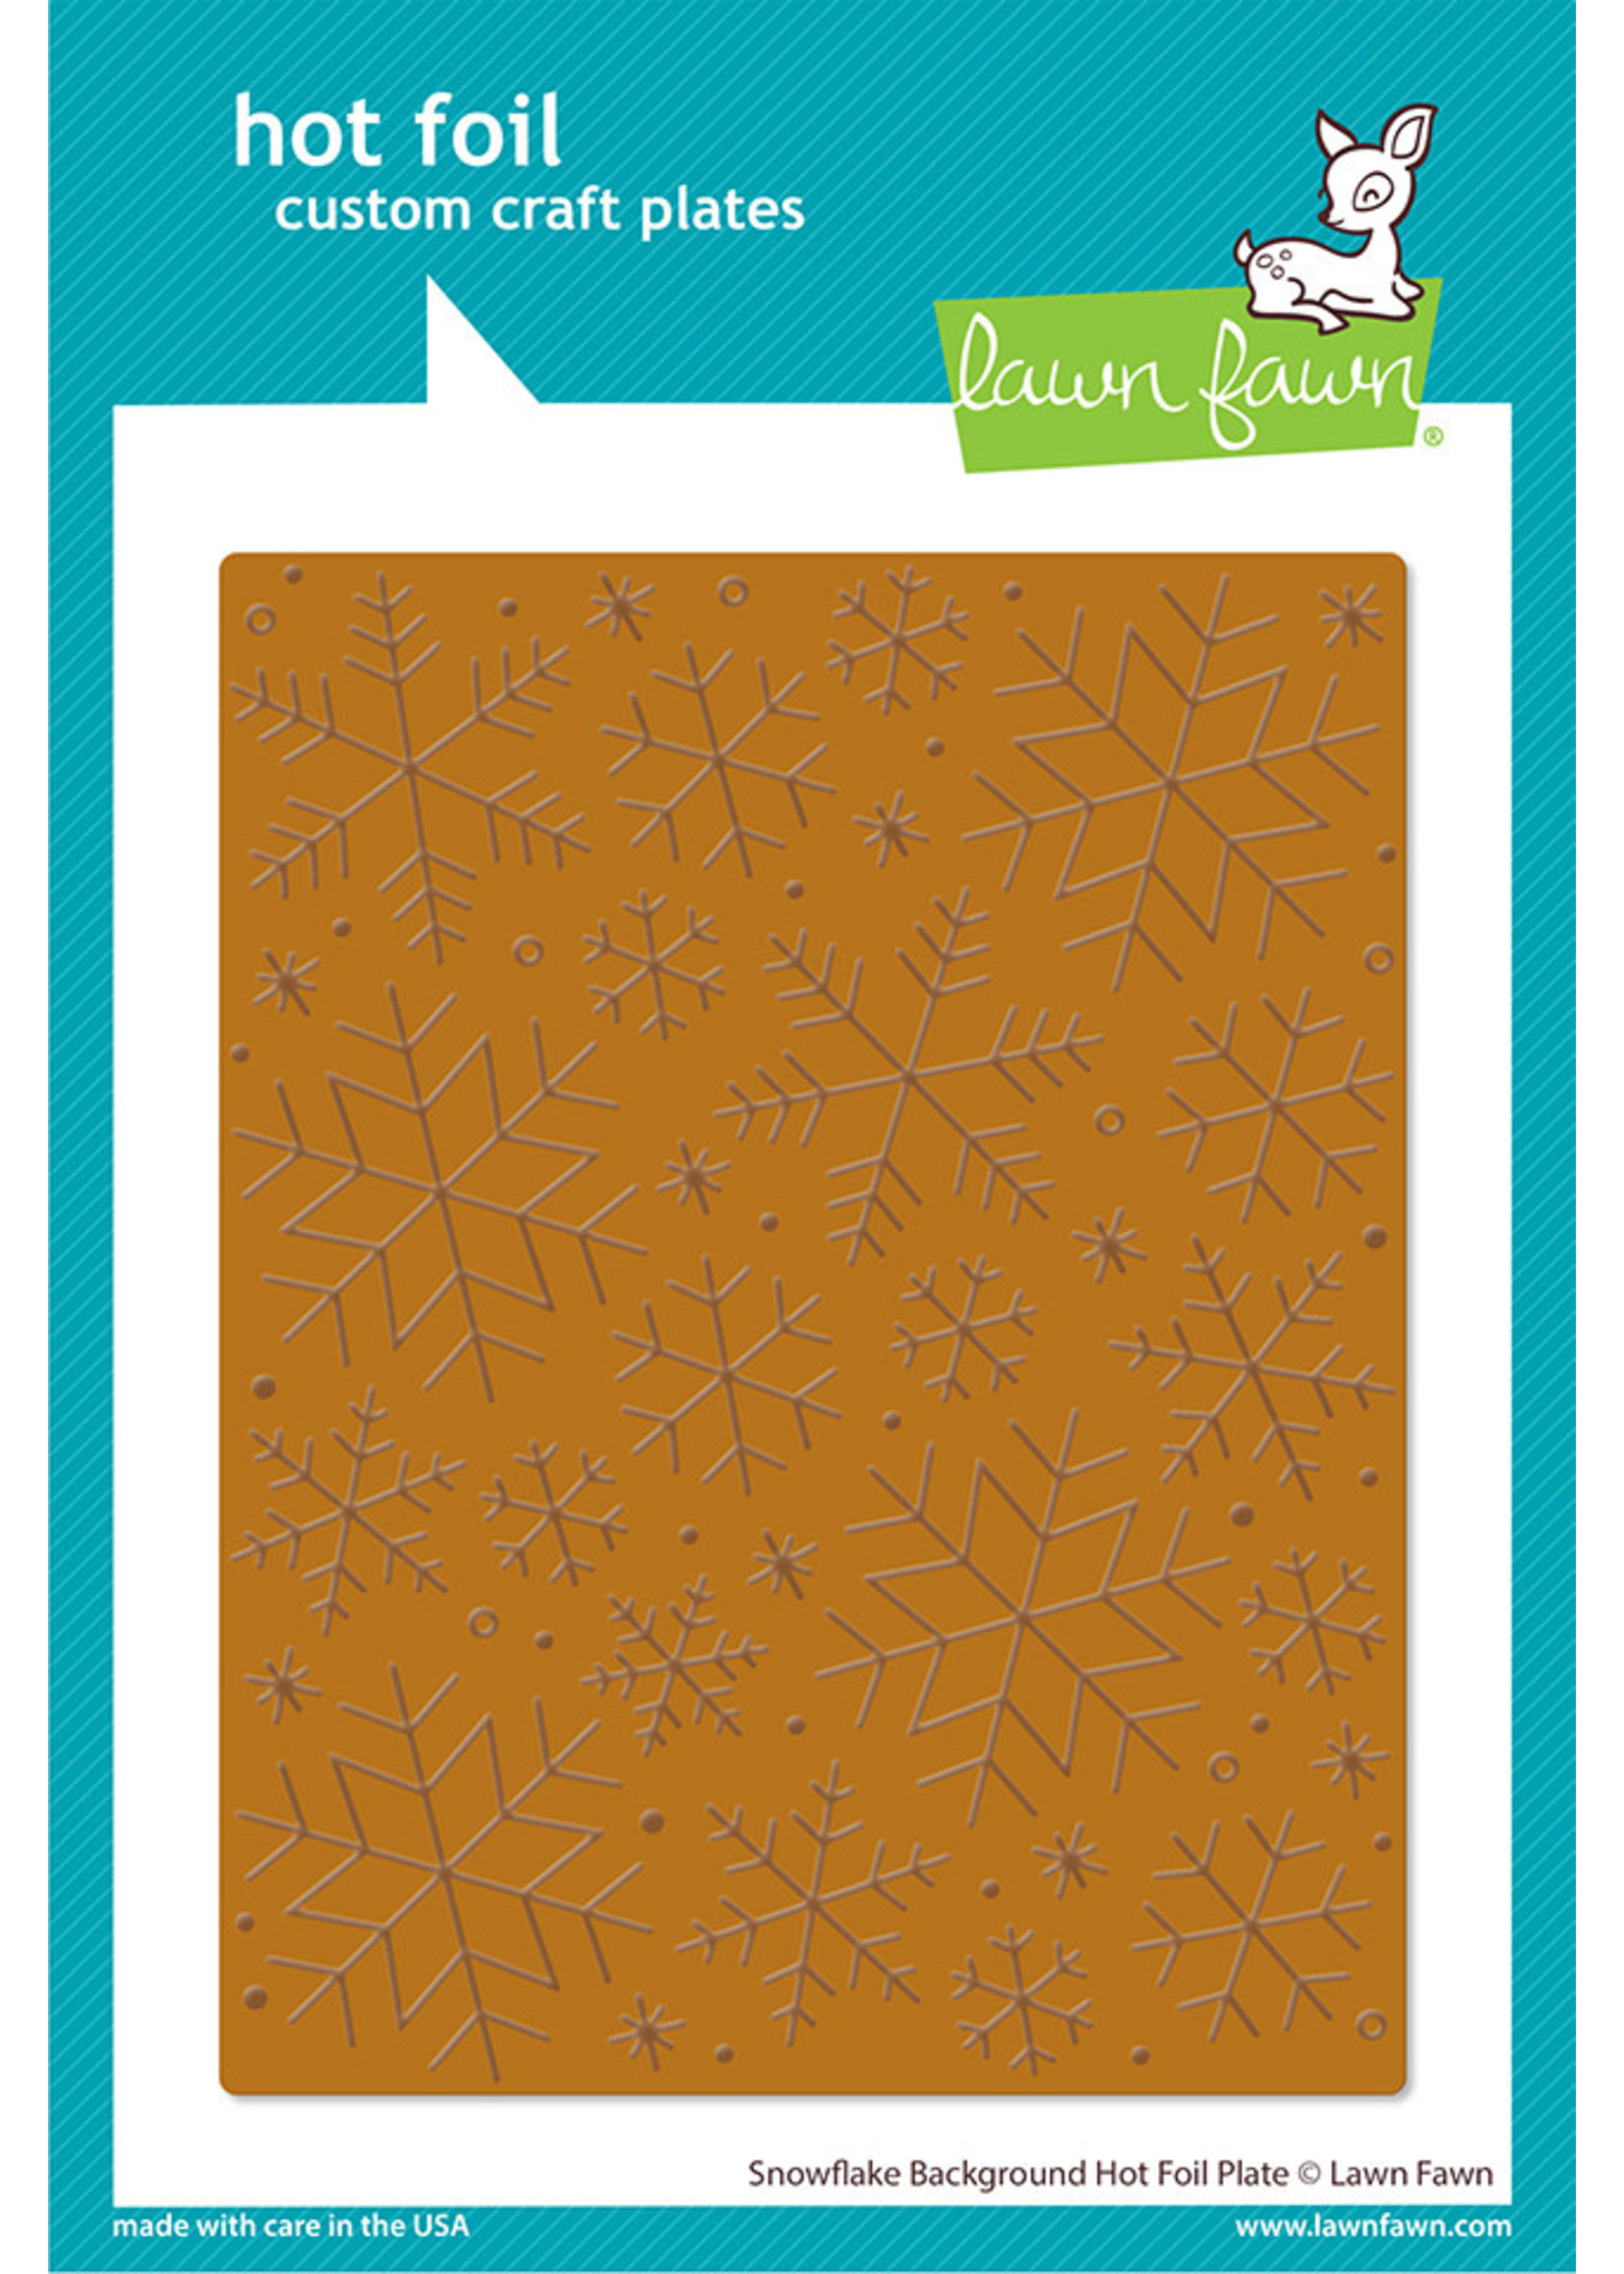 Lawn Fawn snowflake background hot foil plate